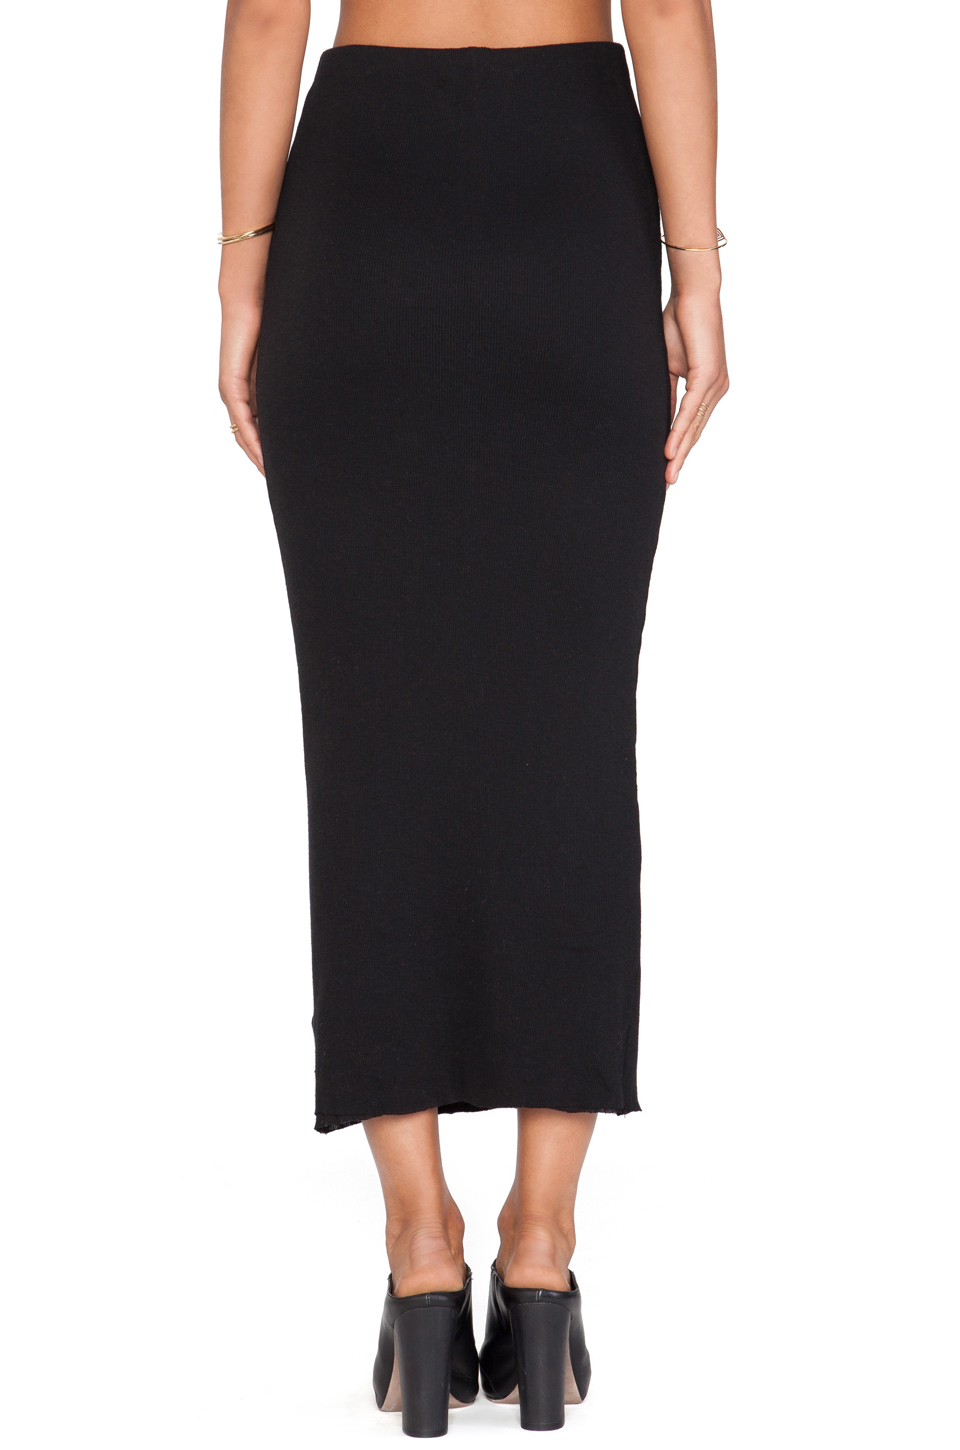 James Perse Long Cashmere Rib Skirt in Black - Lyst